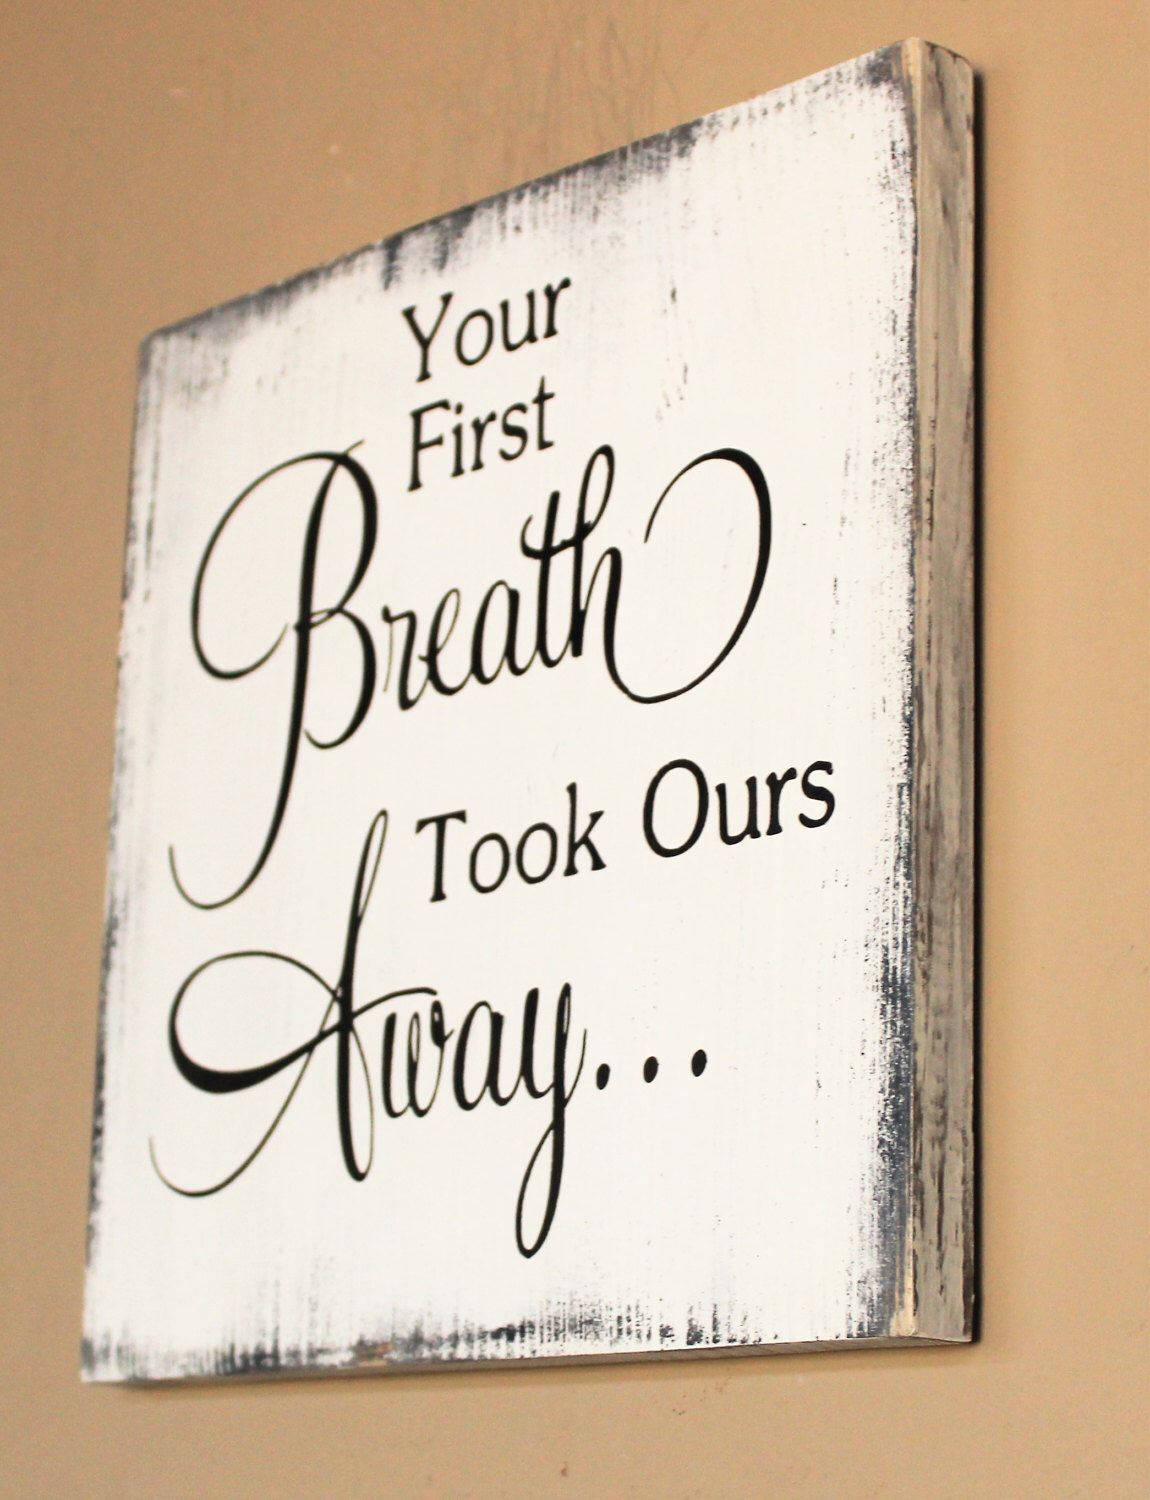 Your First Breath Took Ours Away - Wood Sign - Baby Shower Gifts - Wall Art For Nursery - Wood Signs For Nursery - Gift For Baby -   16 diy projects Baby thoughts ideas